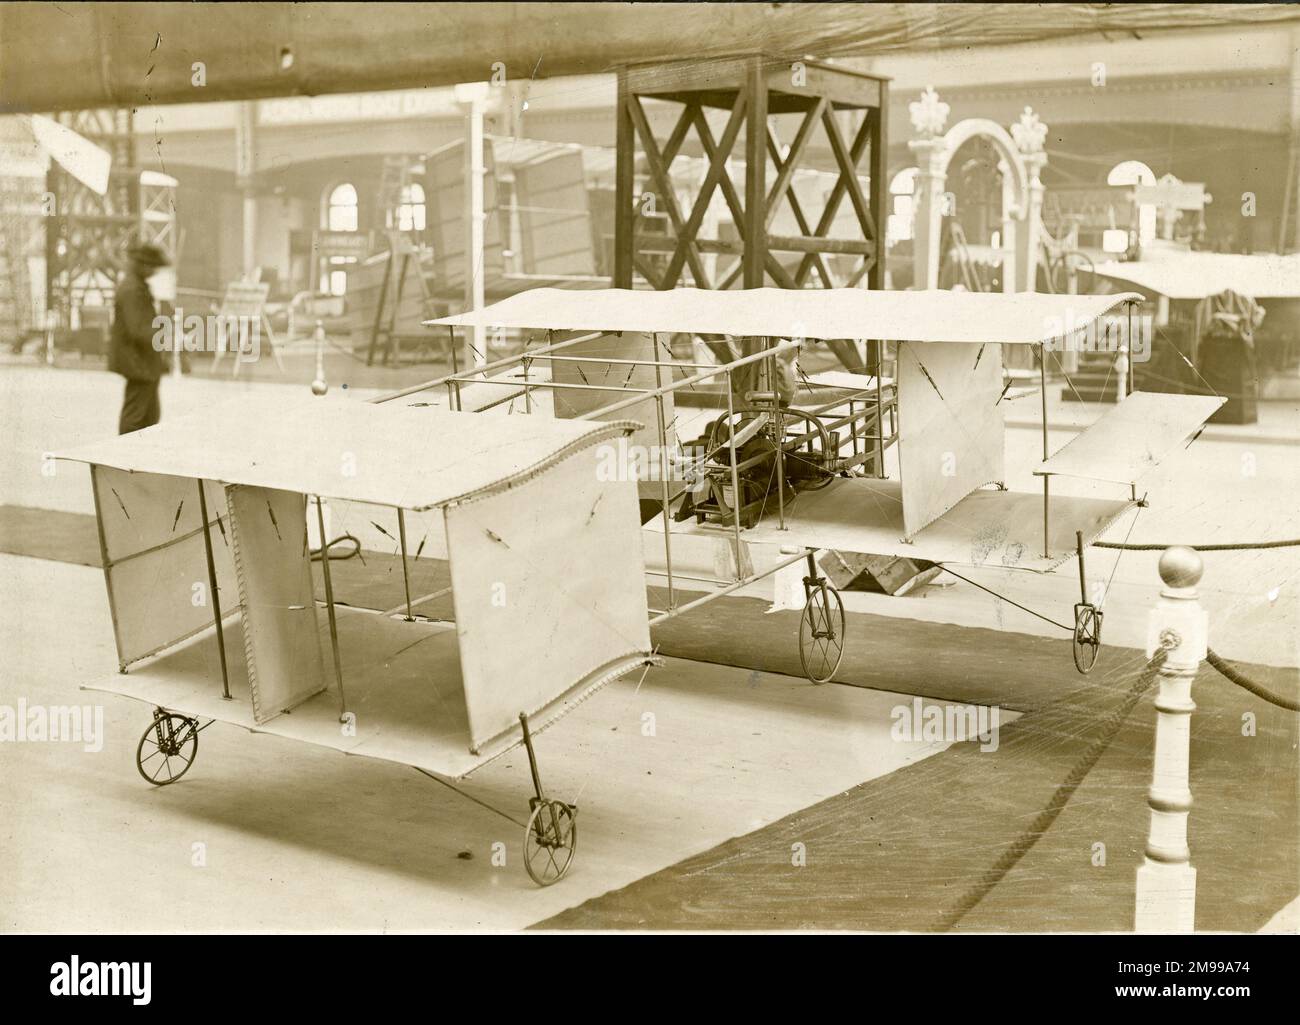 J. D. Tinline model at the Olympia Aero and Motor Boat Exhibition, 11-19 March 1910. Stock Photo